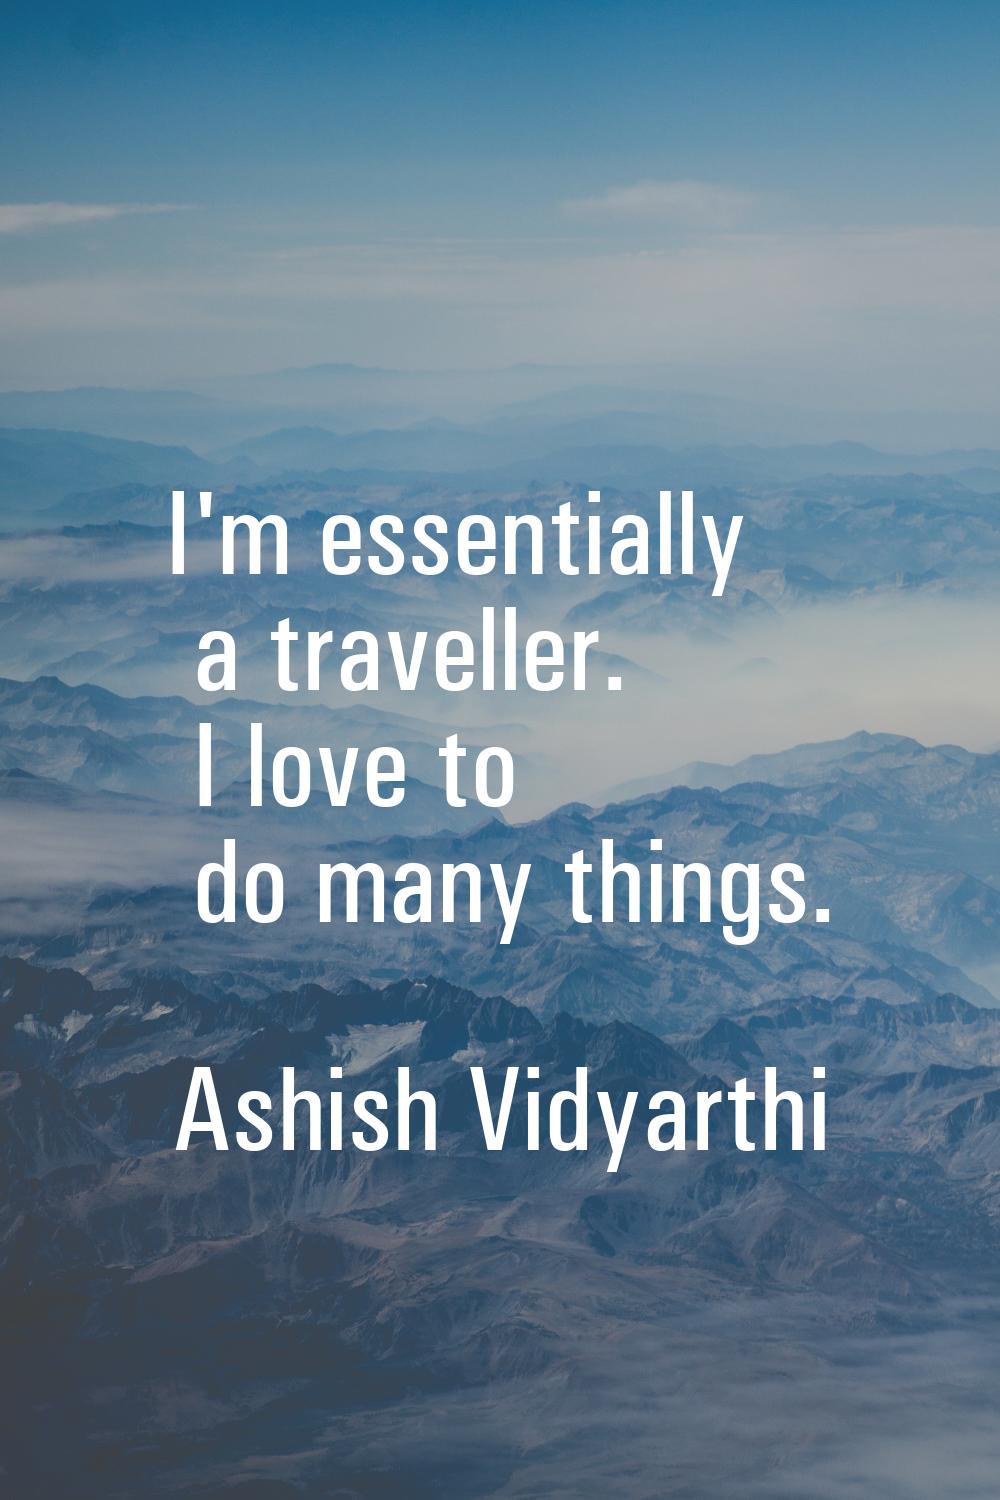 I'm essentially a traveller. I love to do many things.